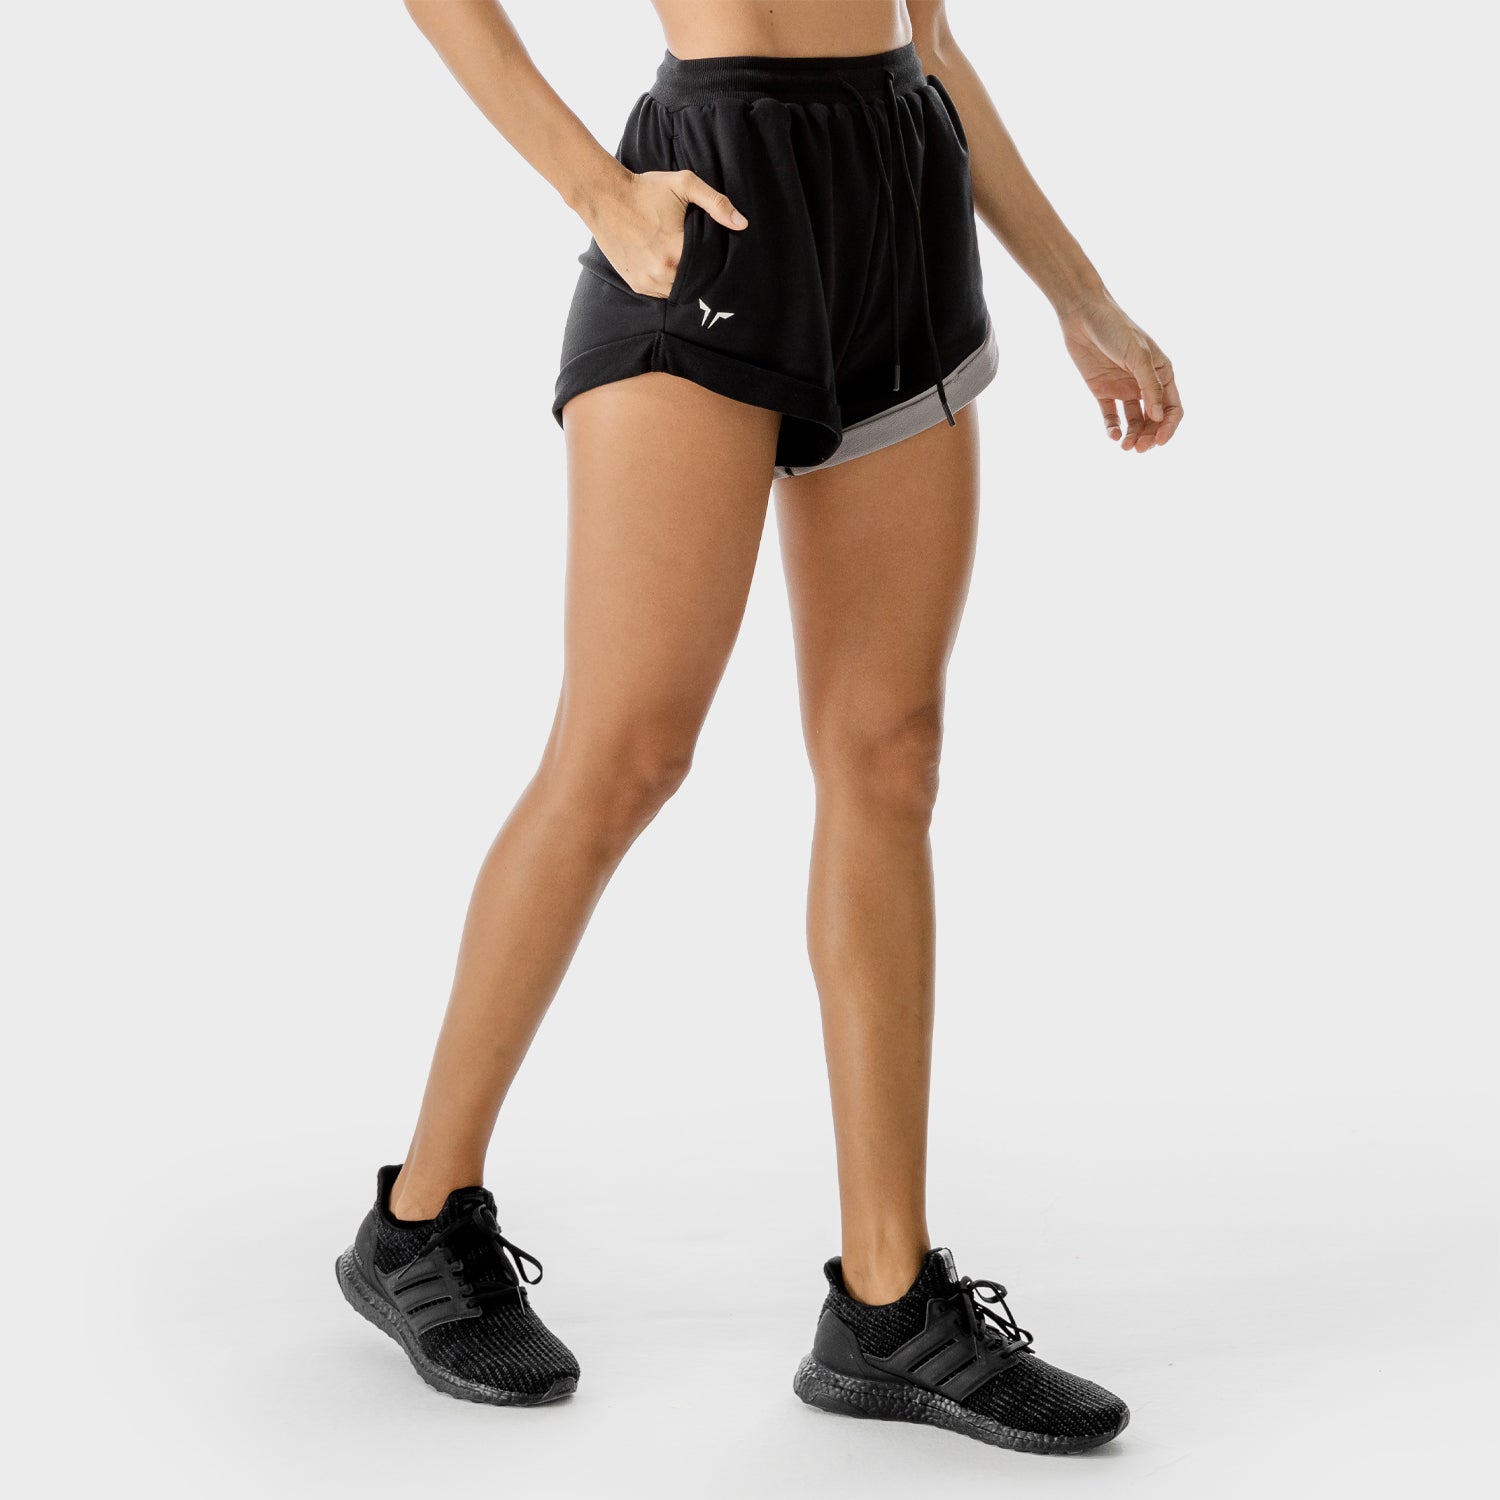 Black Gym Shorts  Black Workout Shorts for Women – Constantly Varied Gear